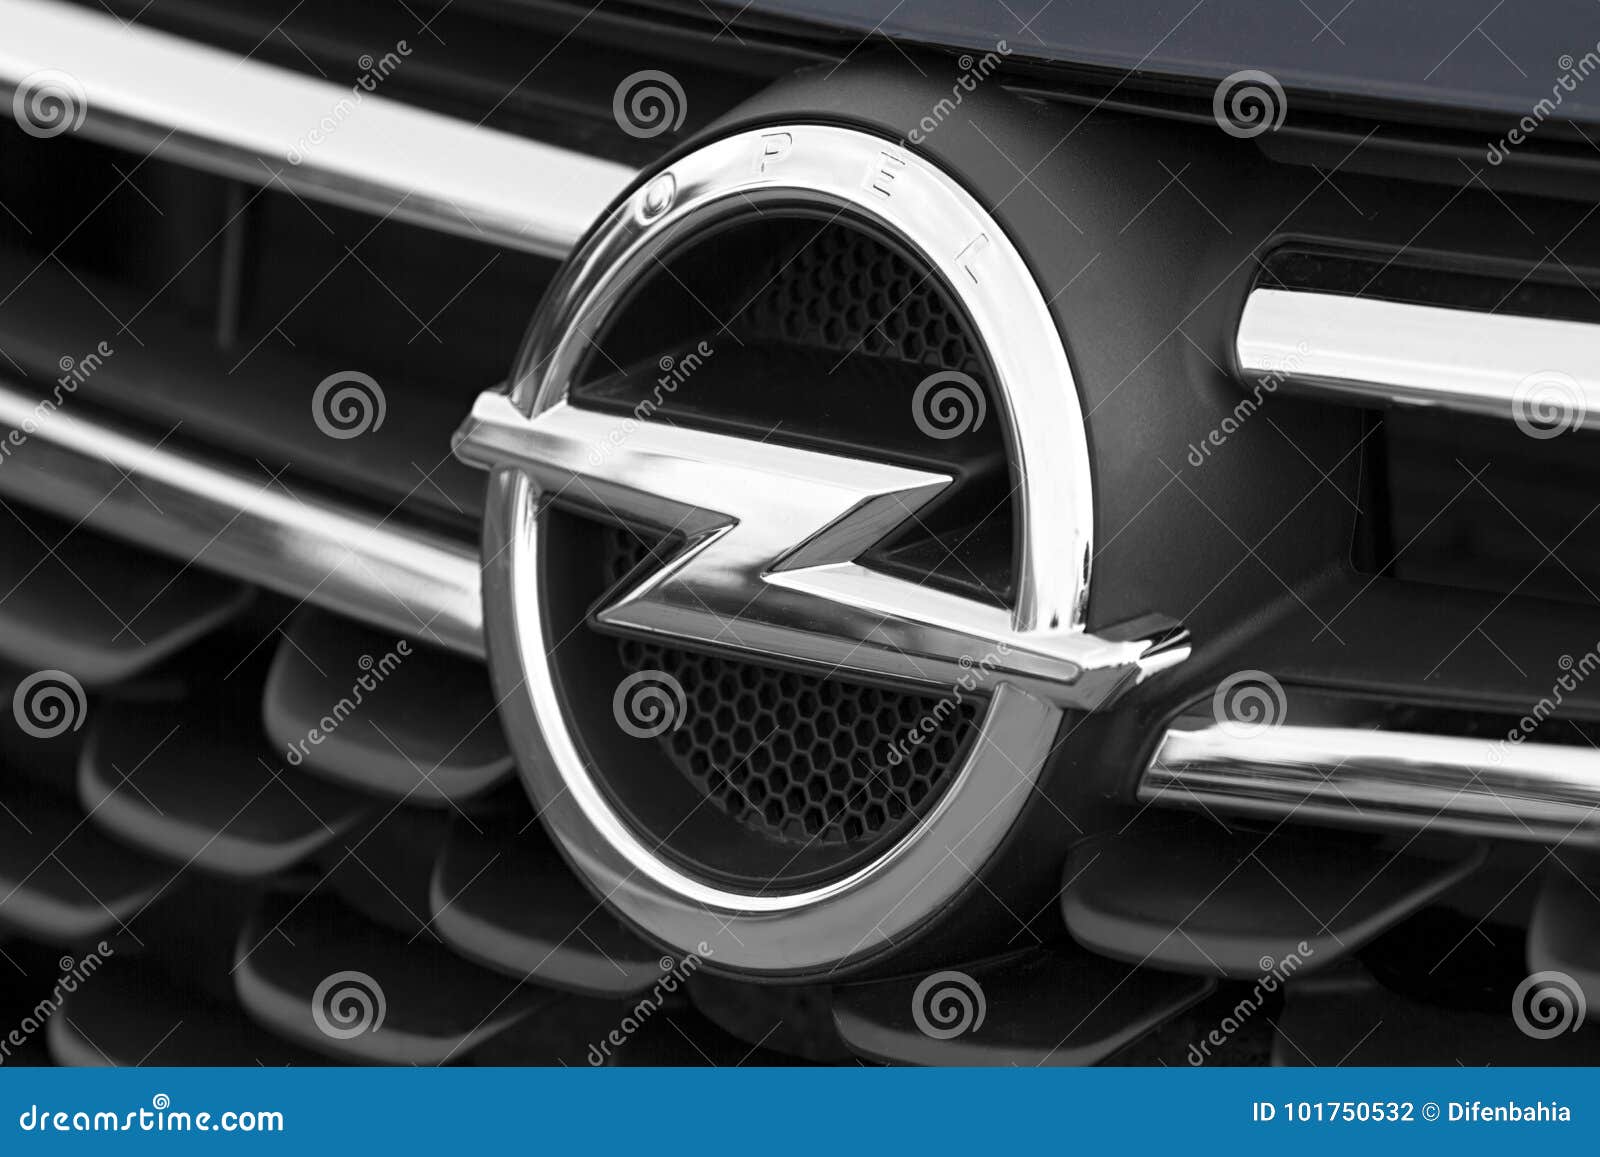 Closeup of the Opel Logo on a the Front of the Car Editorial